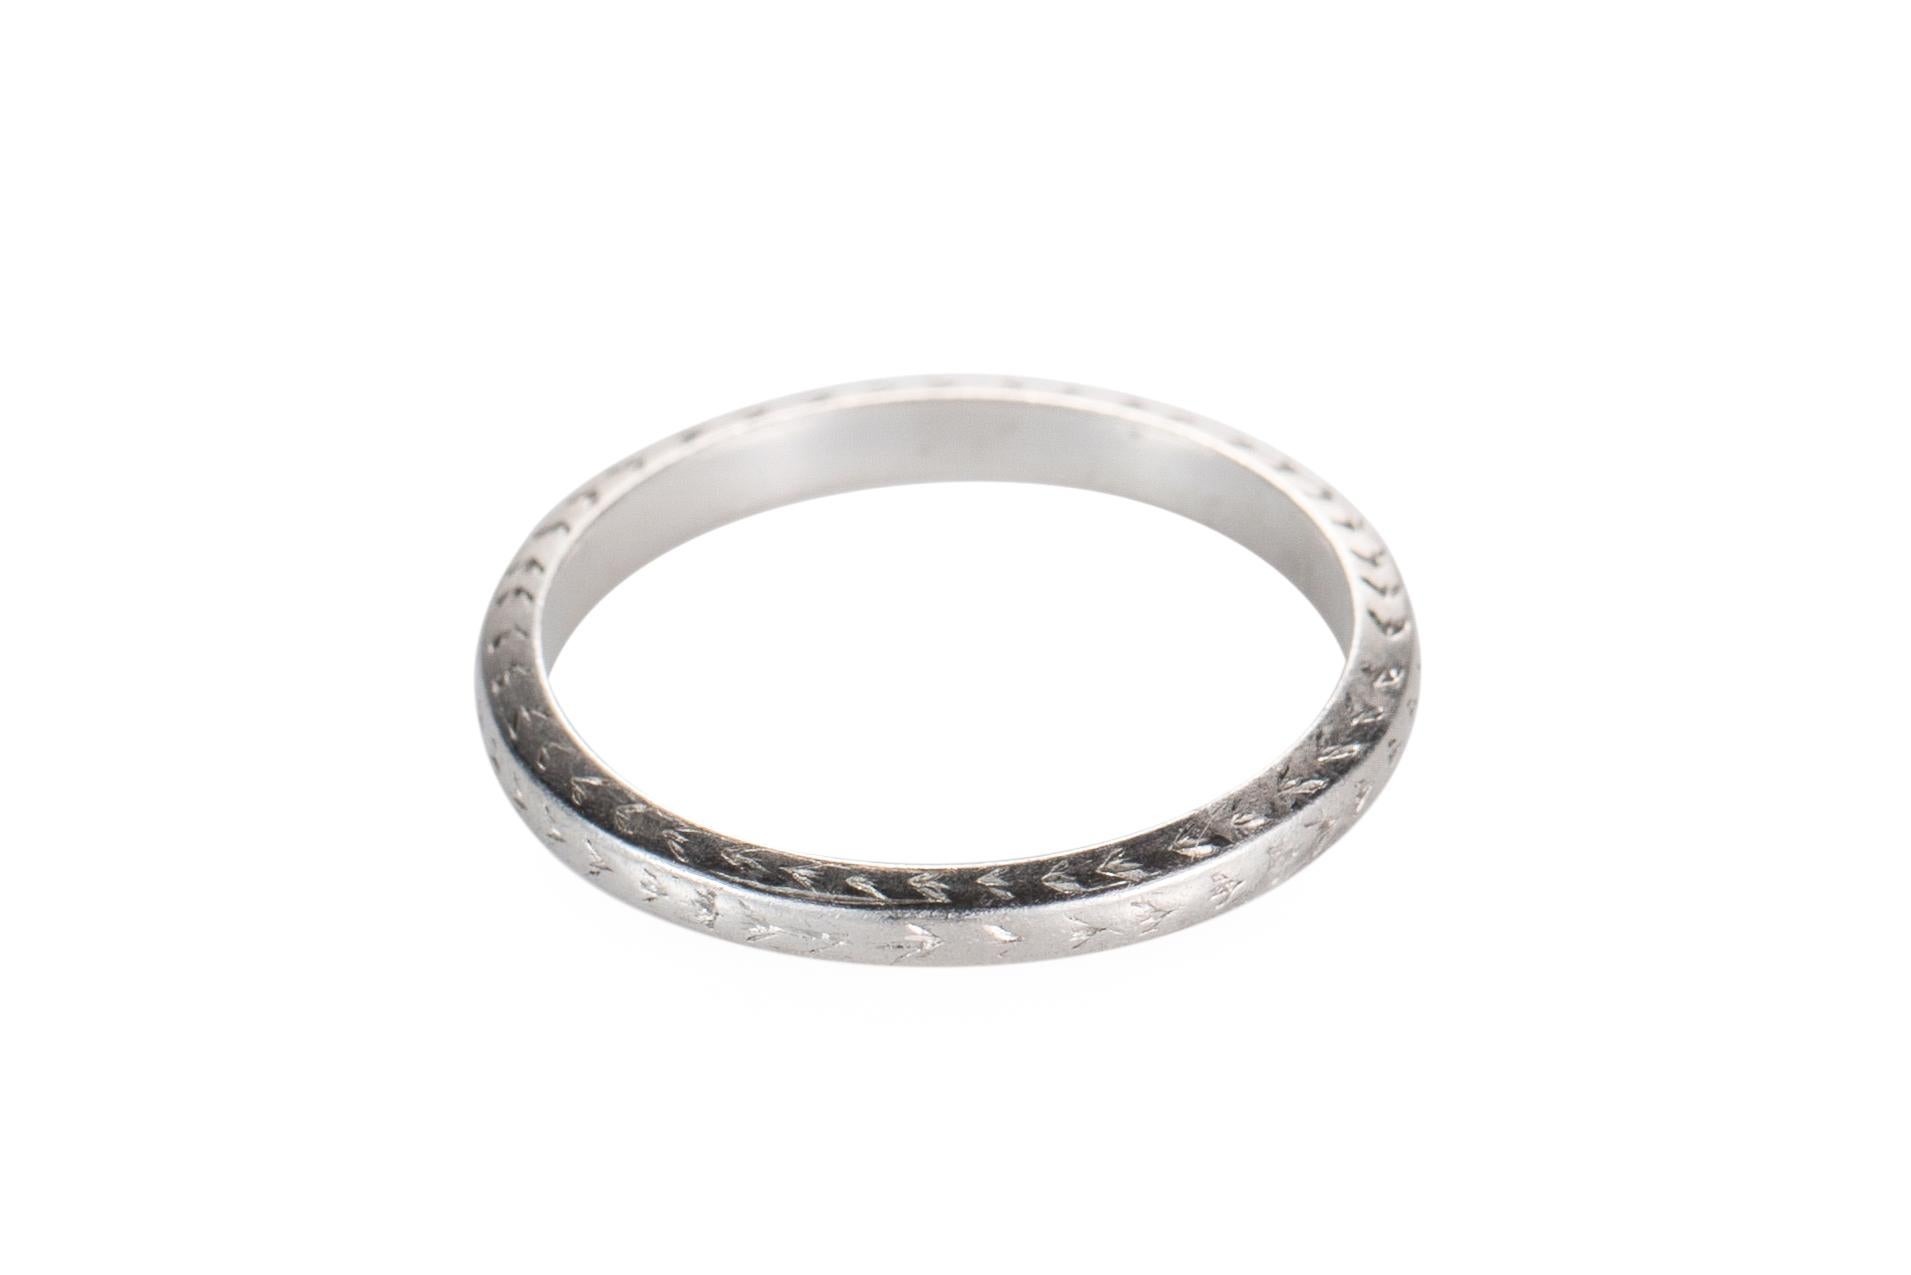 Item Details:
Metal Type: Platinum
Weight: 3 grams
Size: 7 (non resizable)

Absolutely stunning wedding band from the 1920s, art deco era. This ring is crafted entirely in platinum and features etching design work on the side profile and top. The